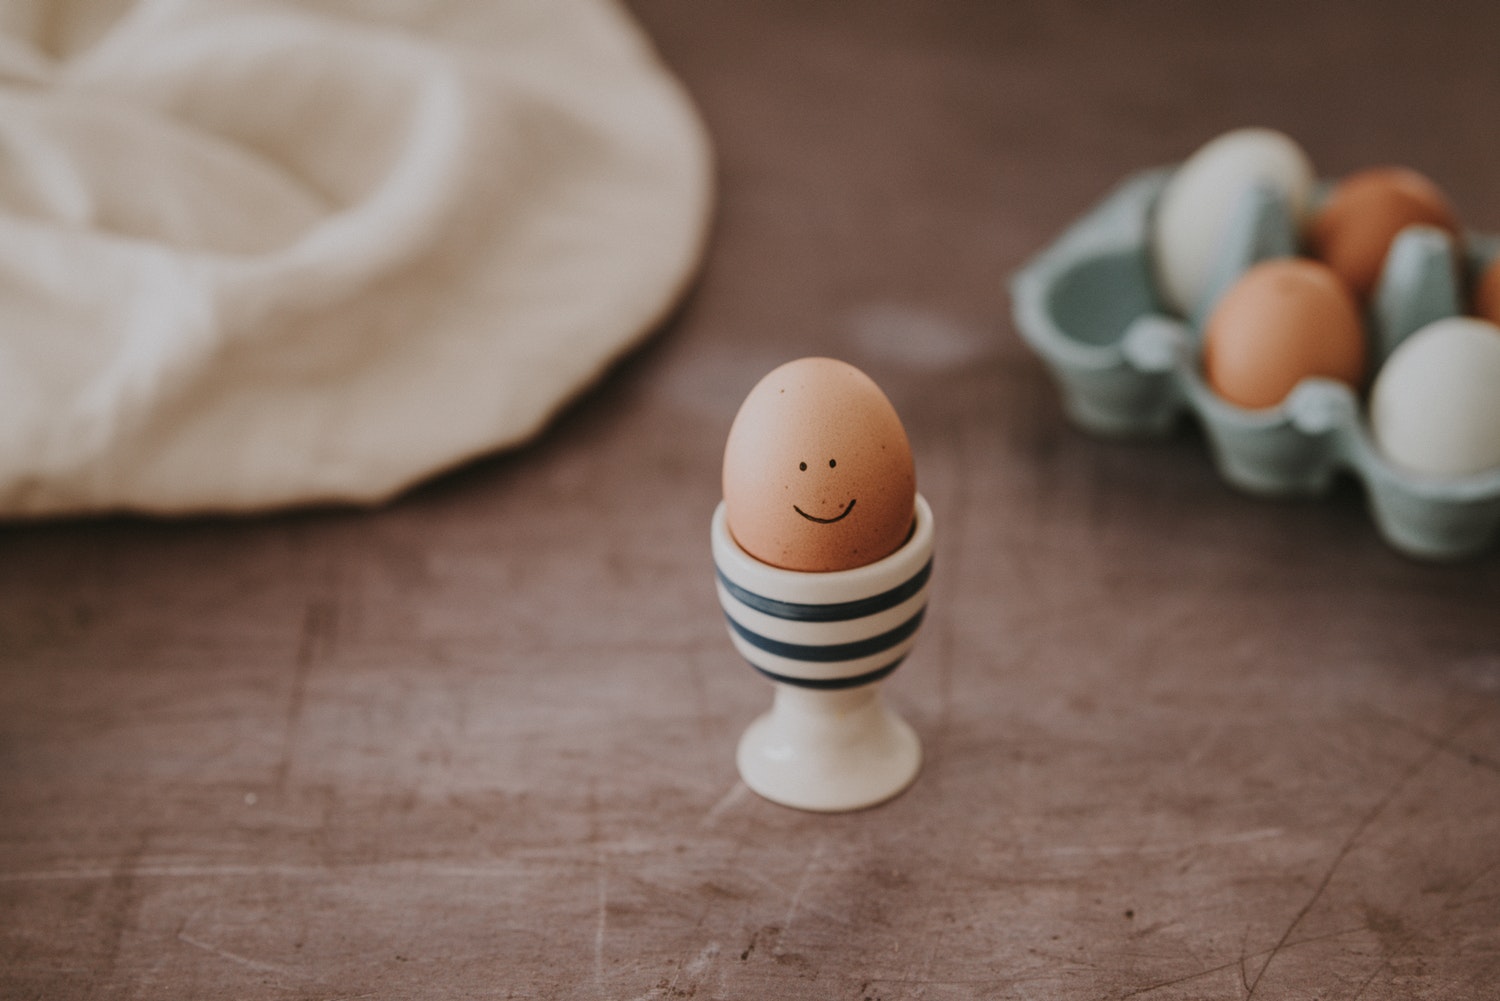 What Came First… Kylie Jenner or “The Egg?”: Twitter Summary for January 15, 2019